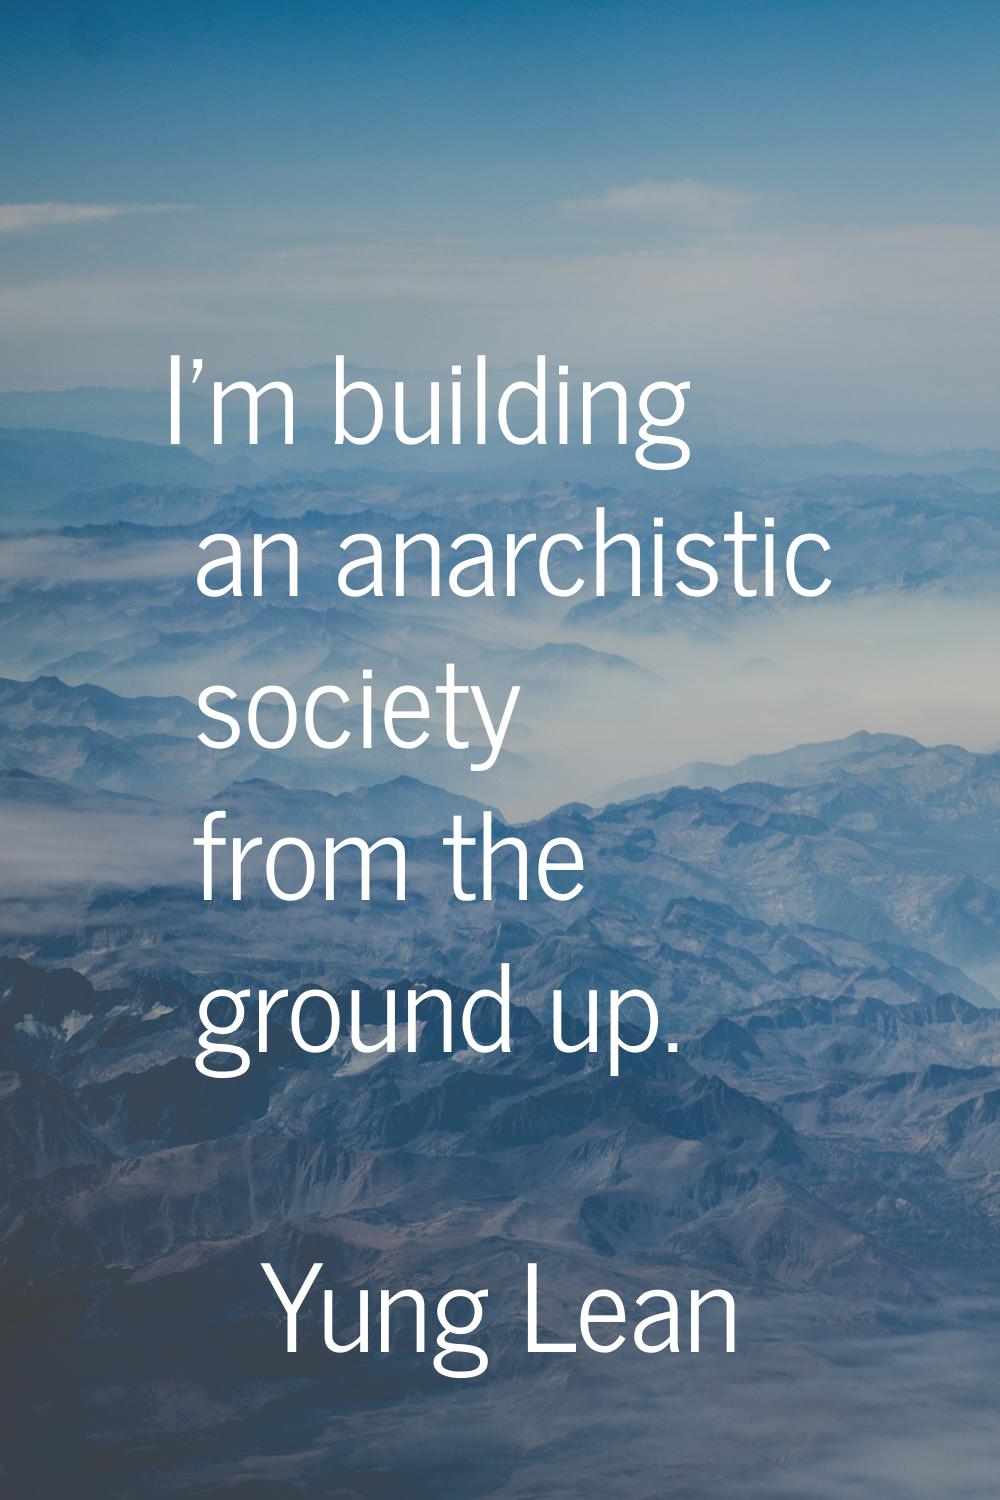 I'm building an anarchistic society from the ground up.